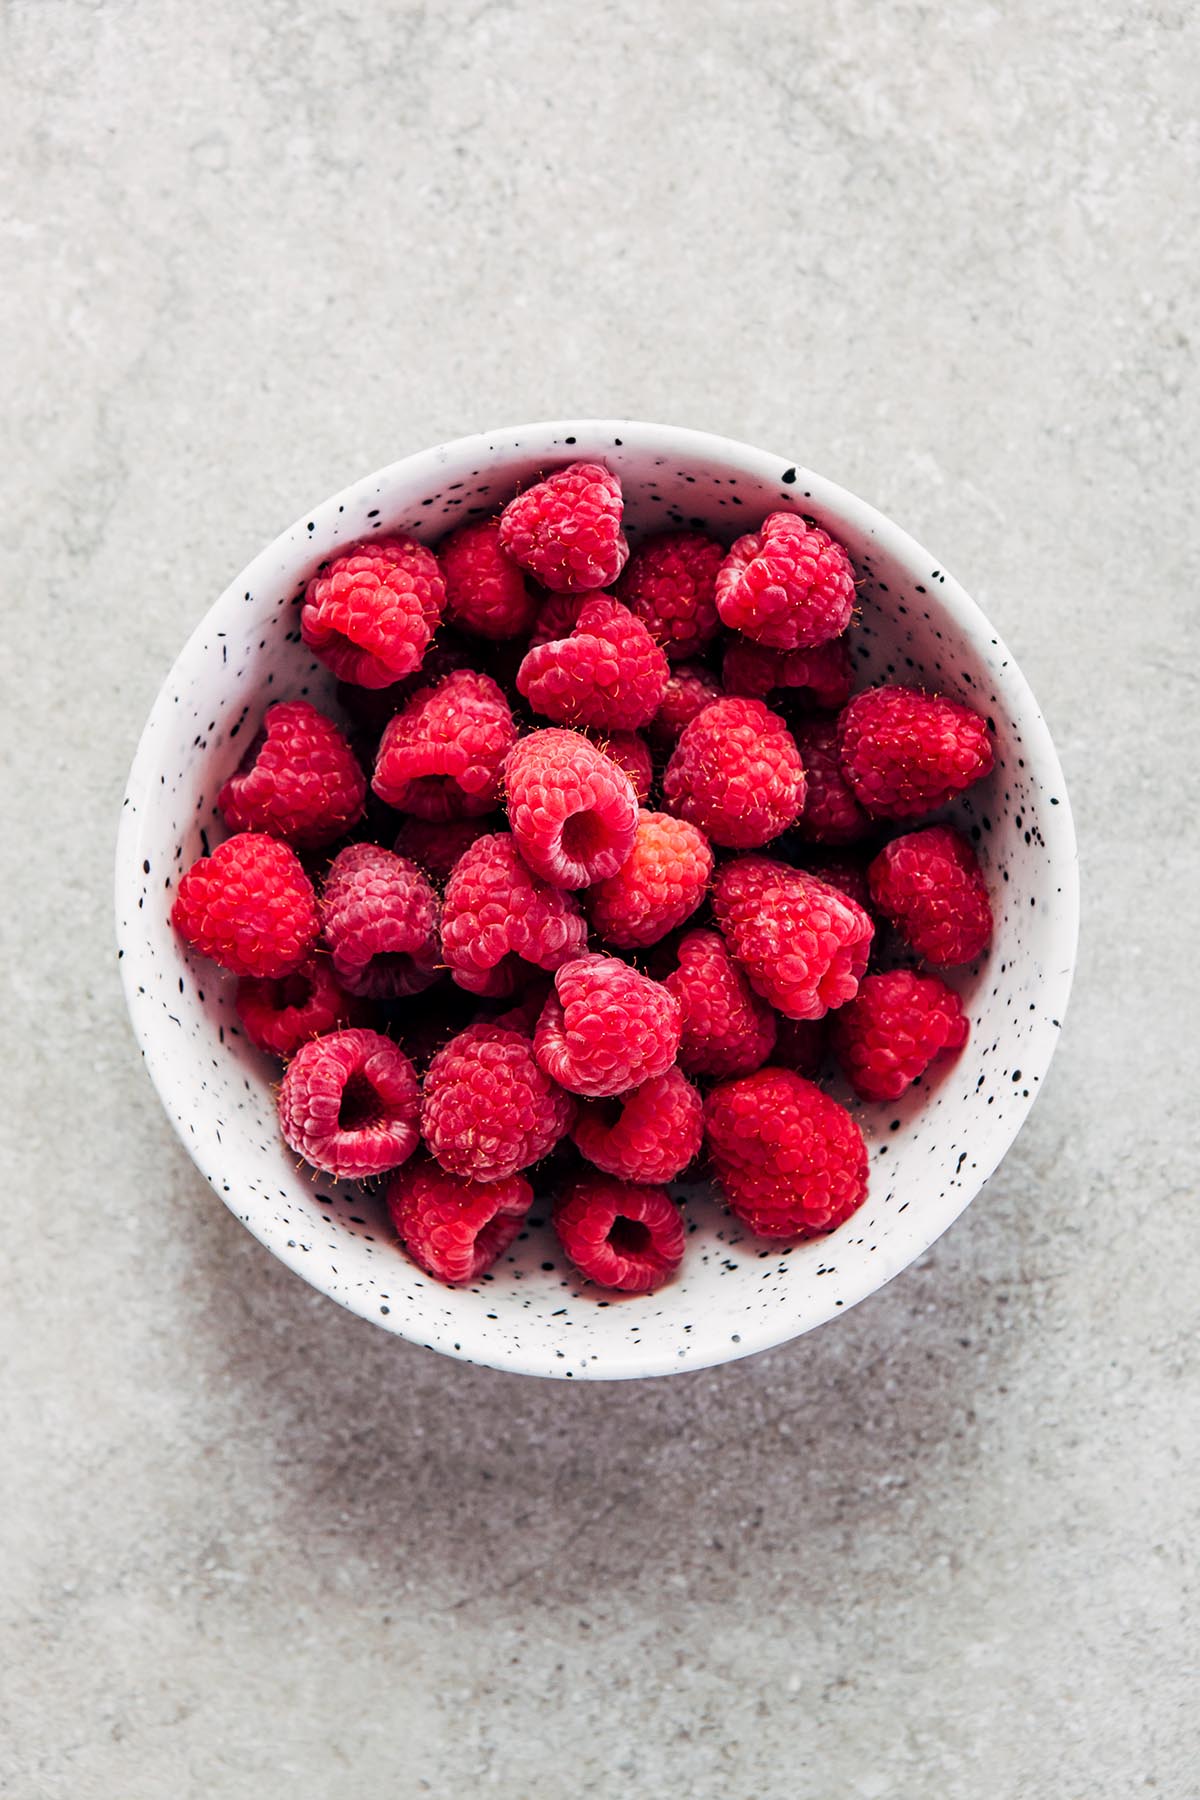 A small bowl of raspberries on a stone surface.